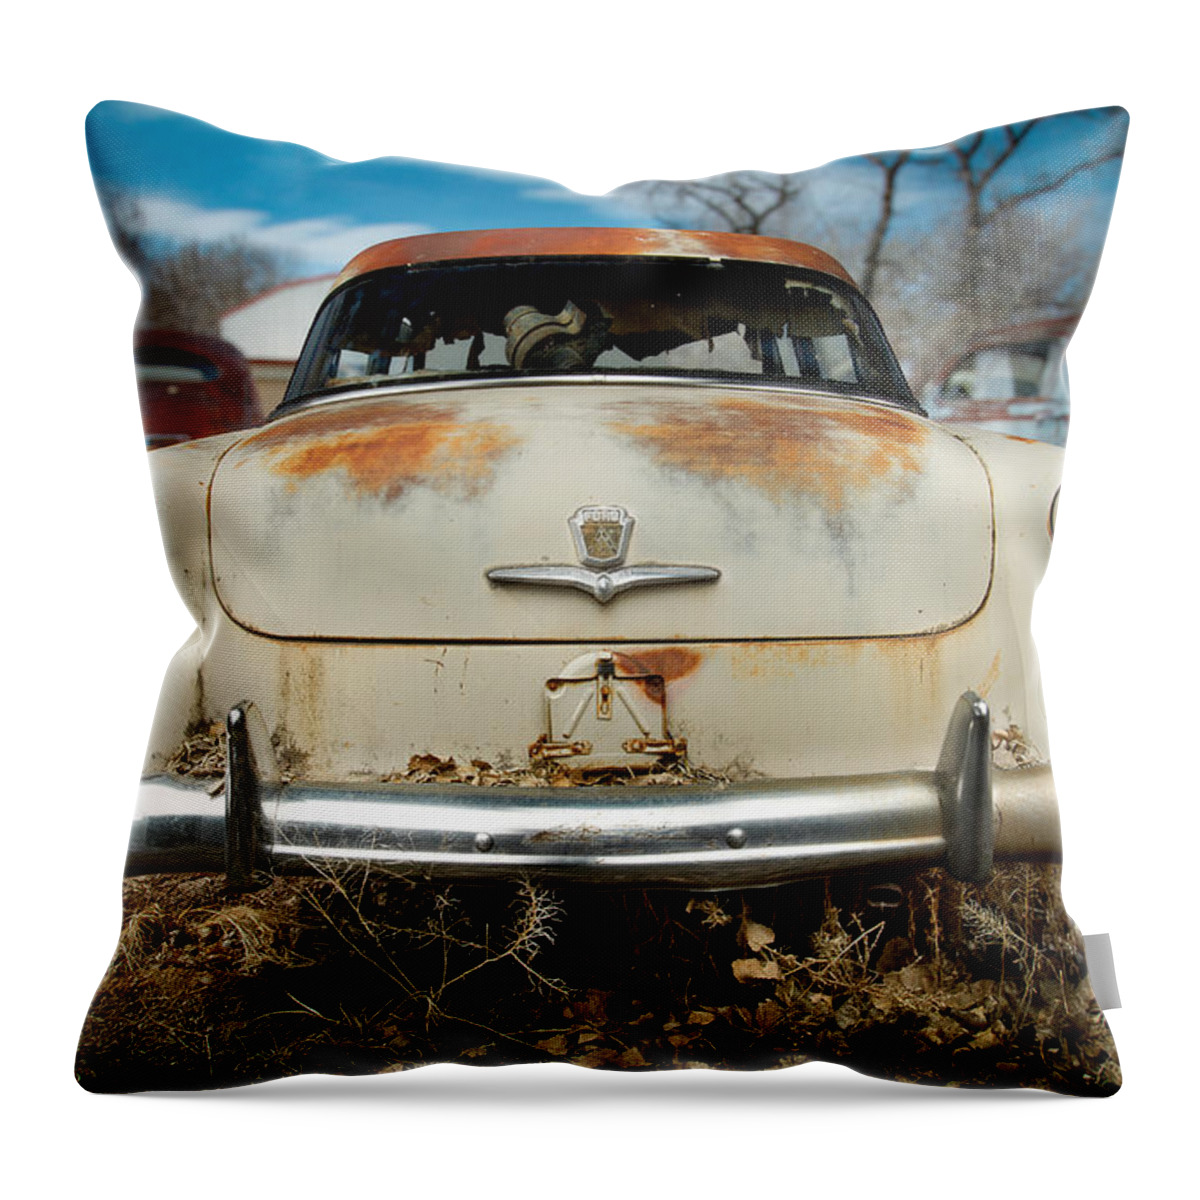 Antique Throw Pillow featuring the photograph 1950 Ford Sedan Rear by Yo Pedro